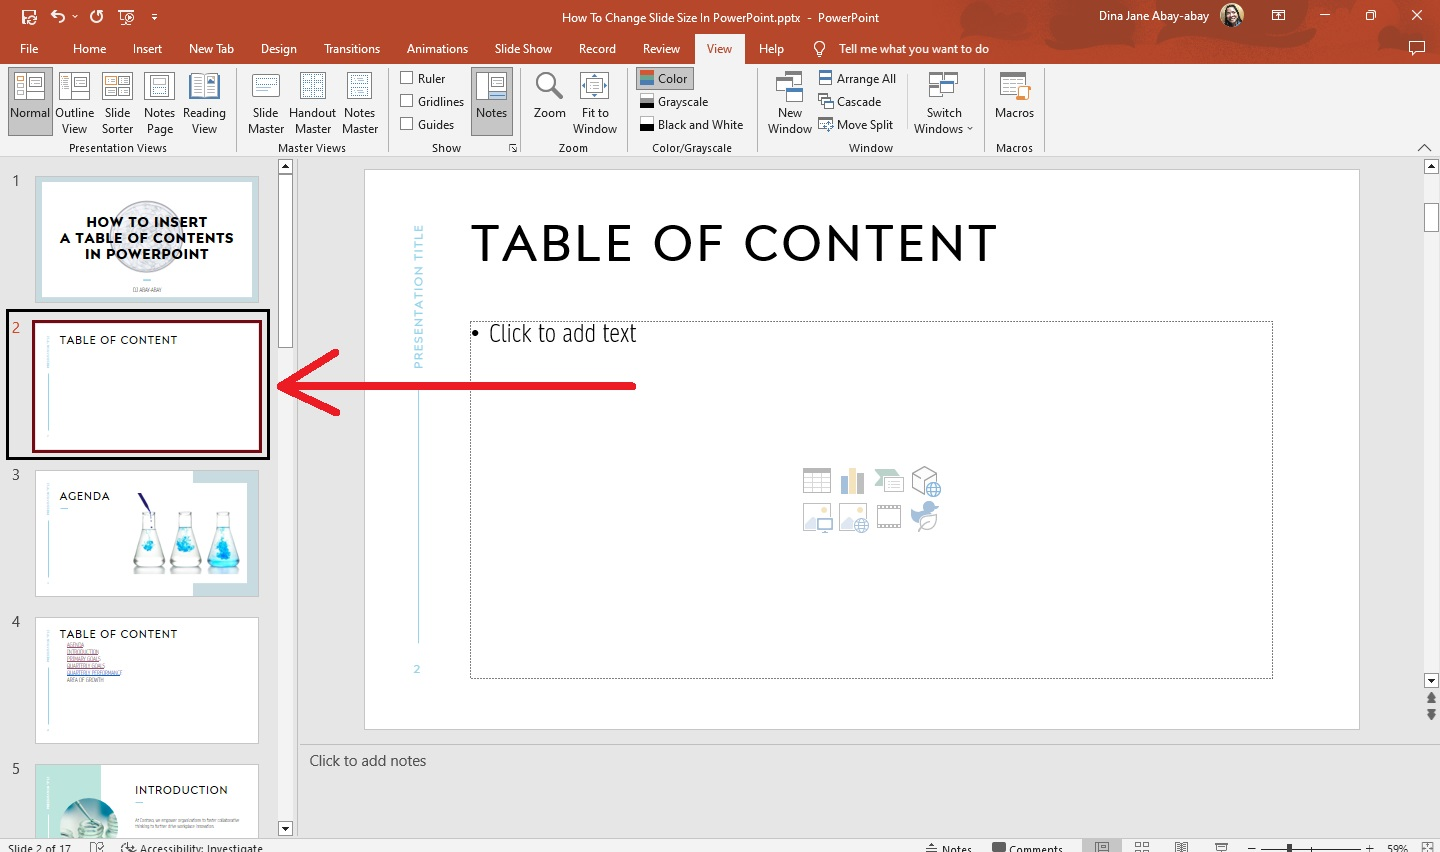 Select the table of contents slide.